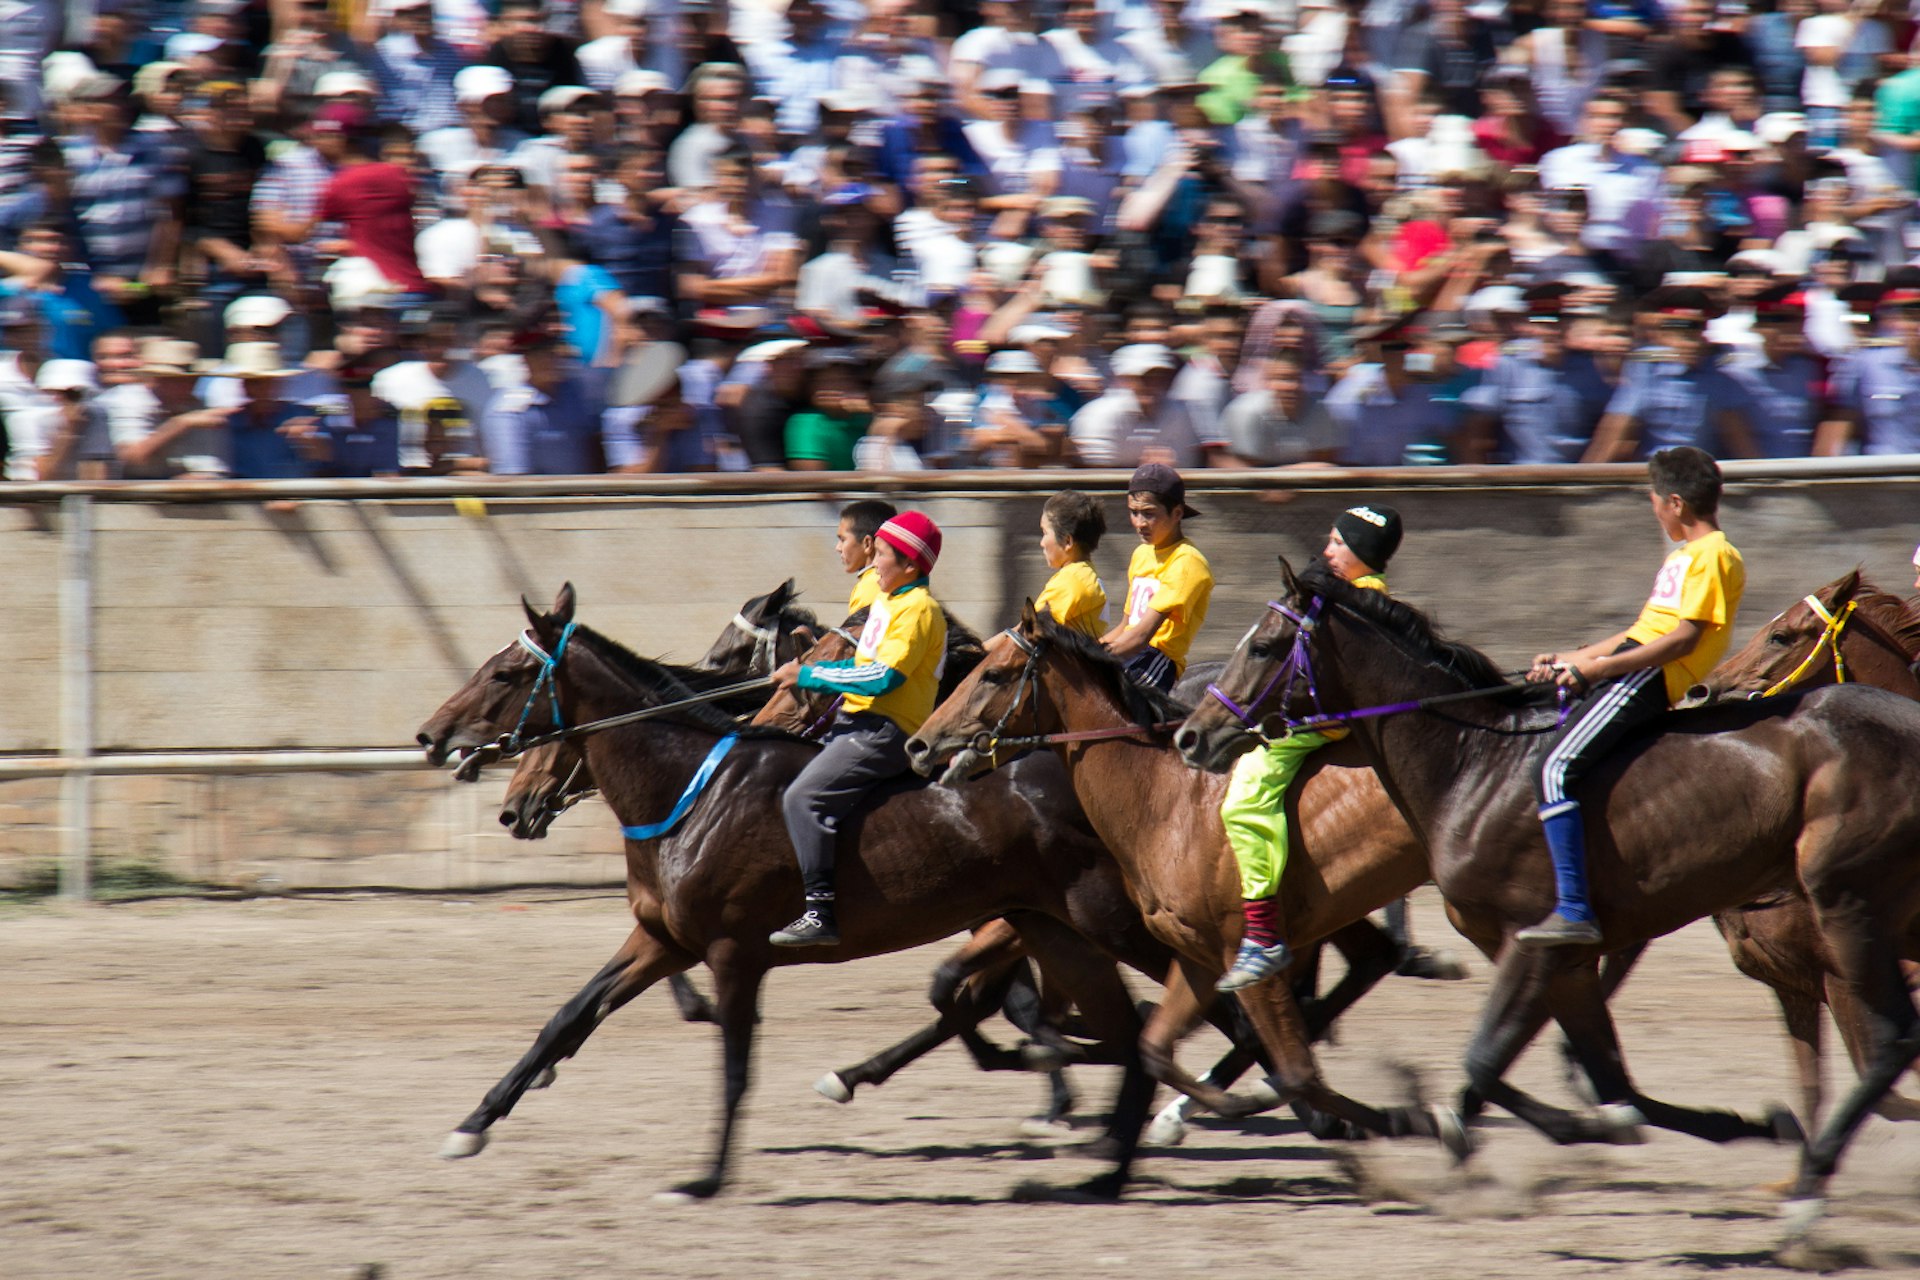 Traditional Kyrgyz horse racing in Bishkek. Image by Stephen Lioy / Lonely Planet